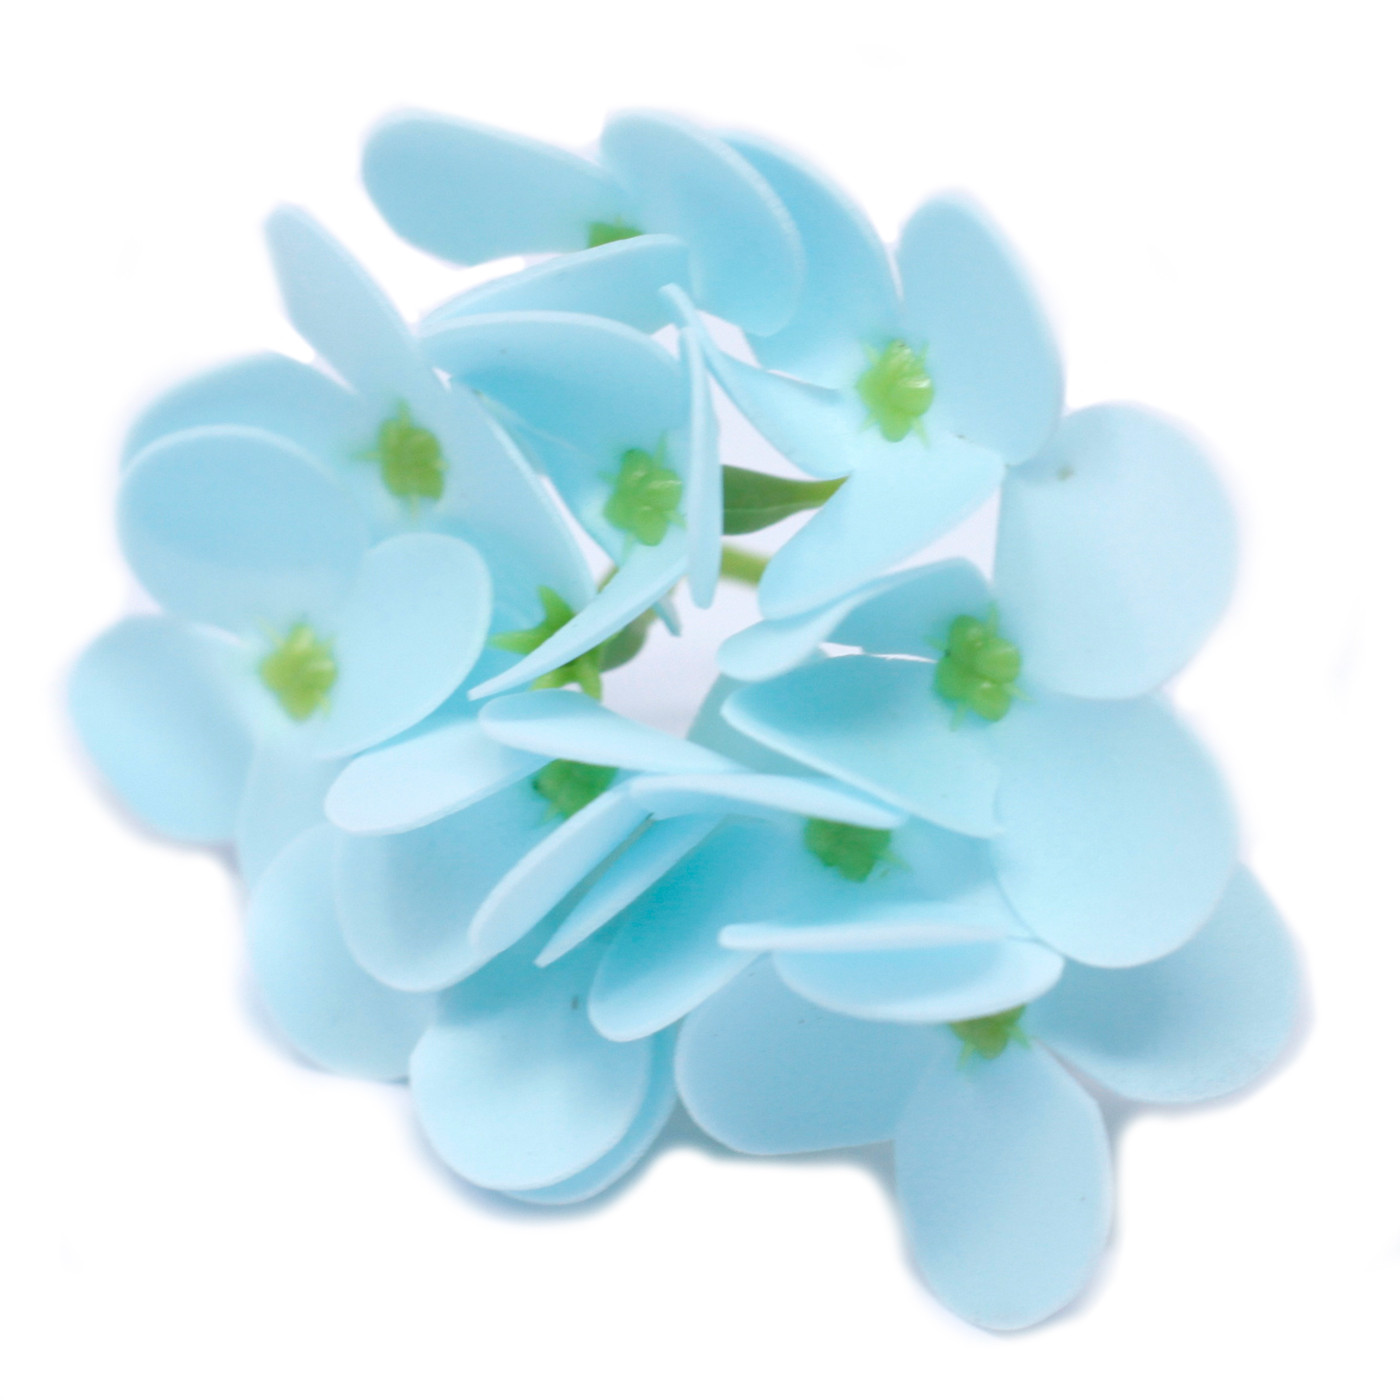 10 x Craft Soap Flowers - Hyacinth Bean - Baby Blue - Click Image to Close